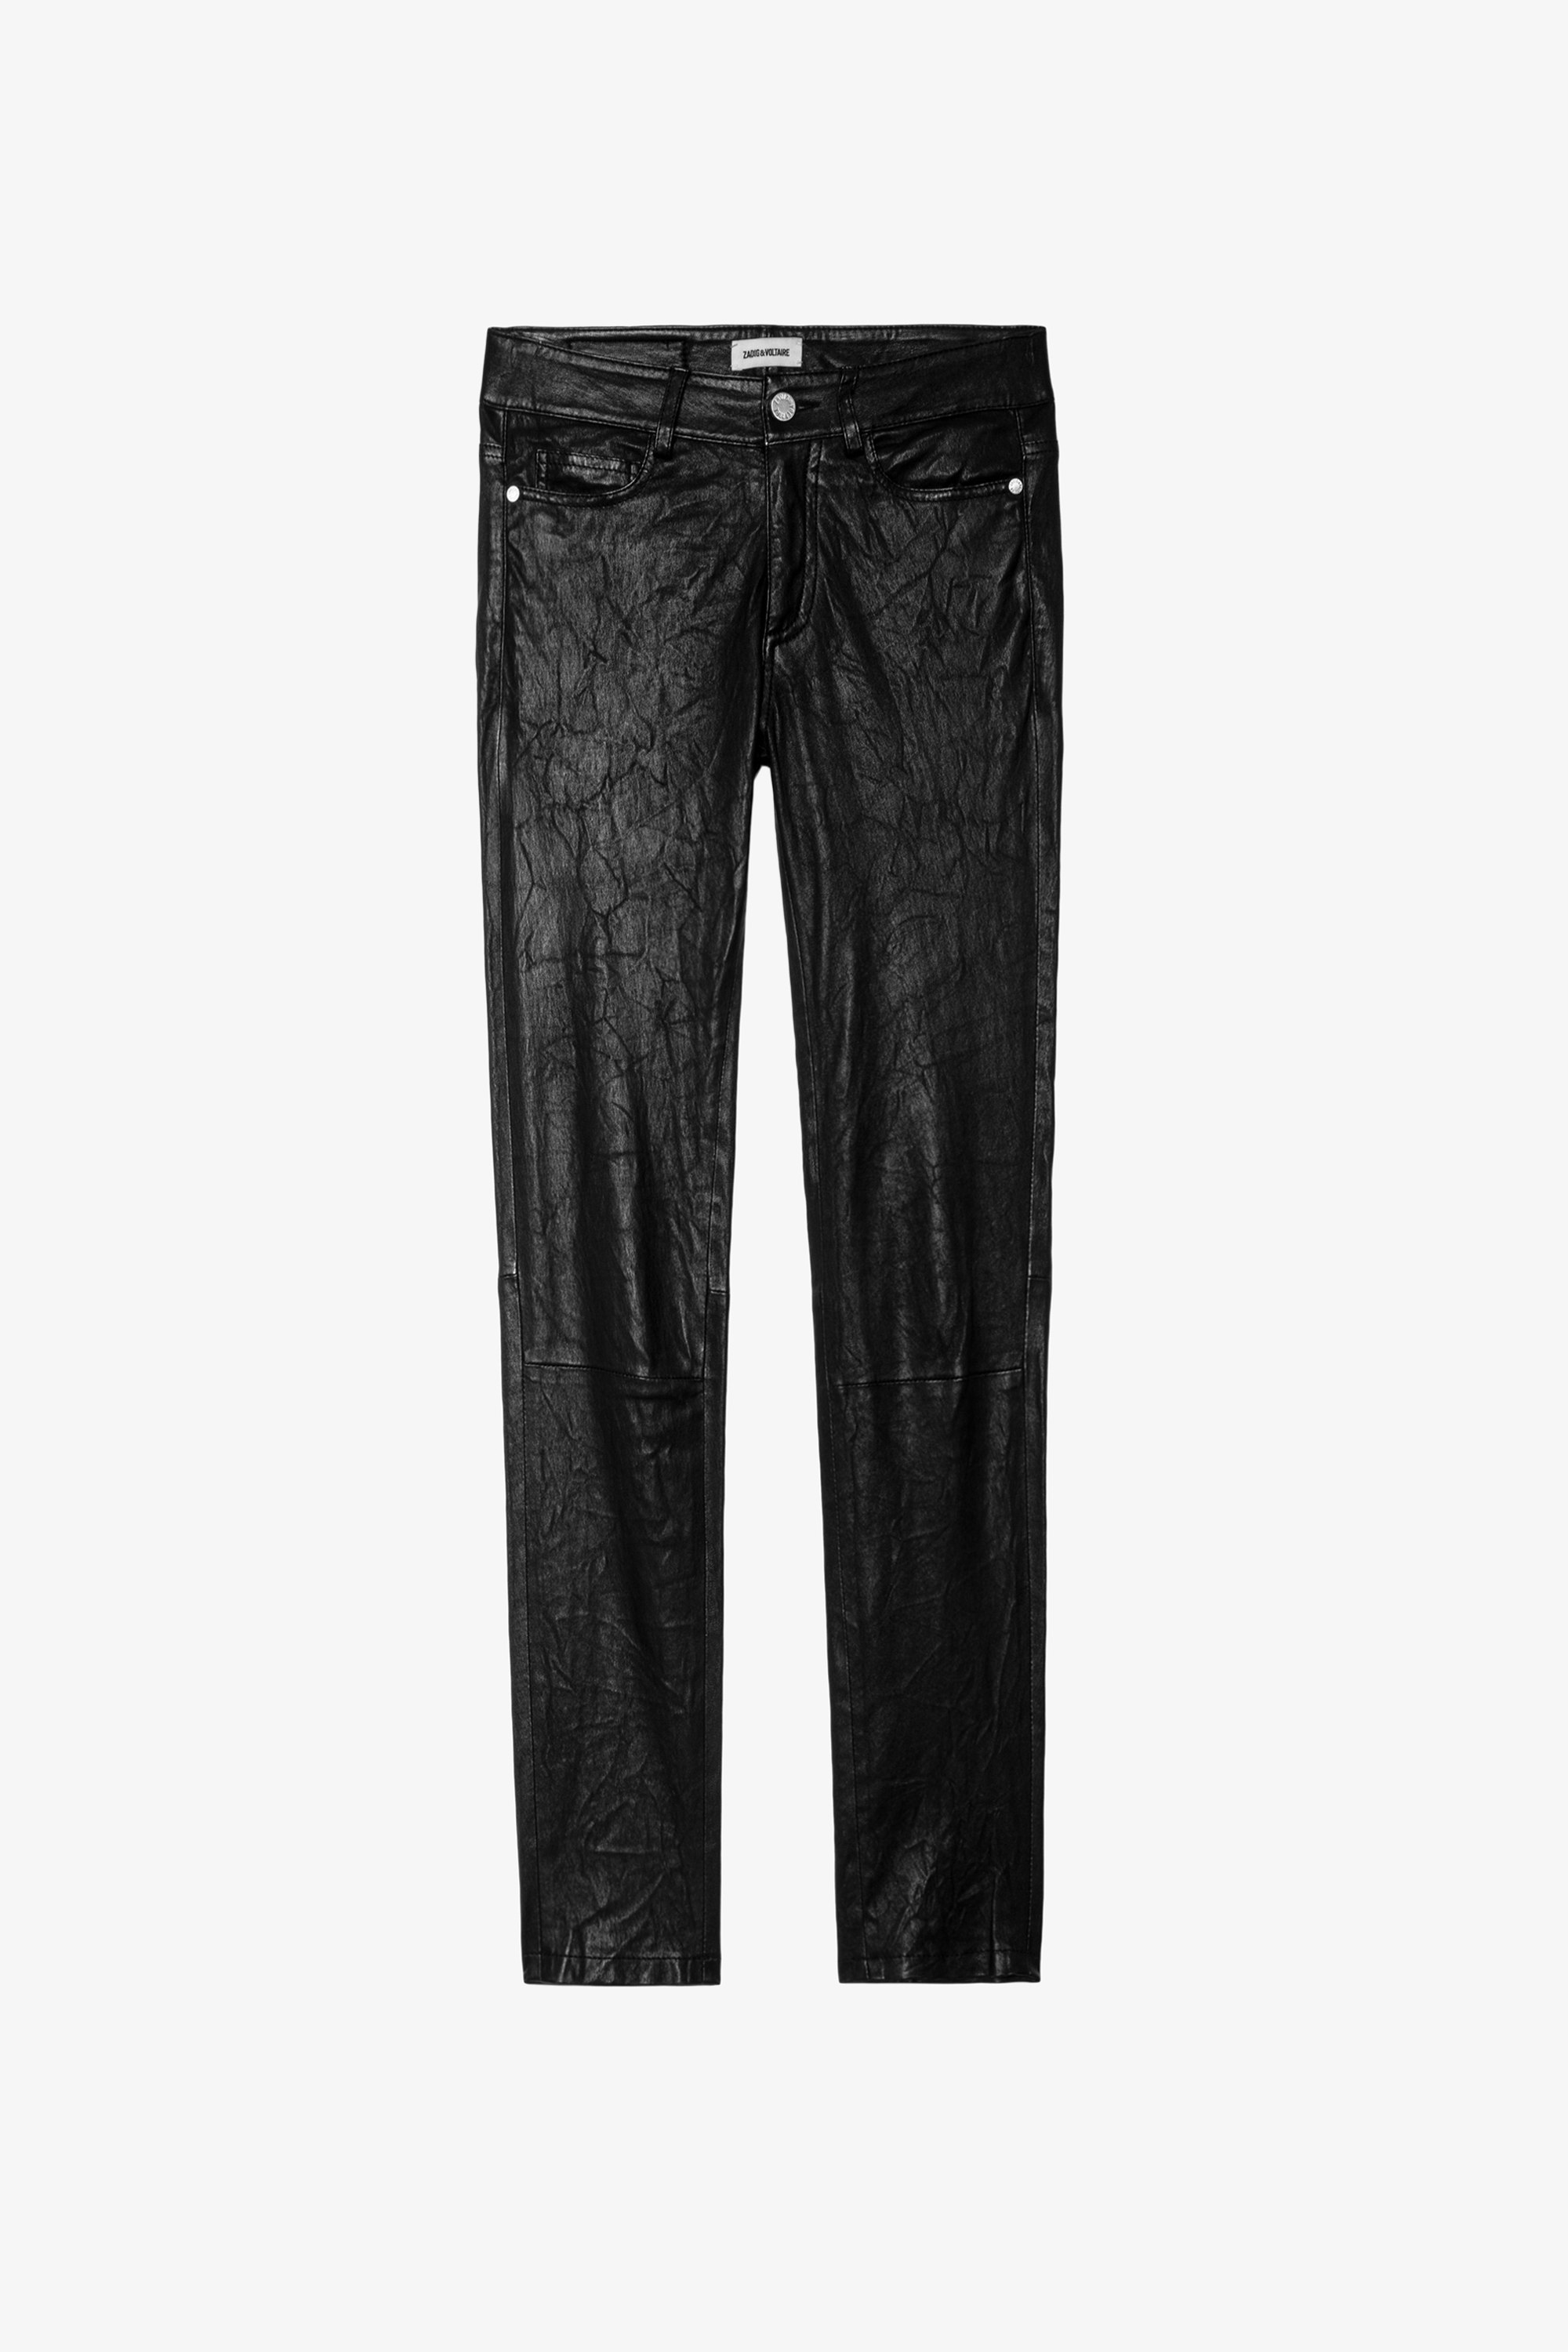 Phlame Crinkled Leather Pants - Lambskin pants